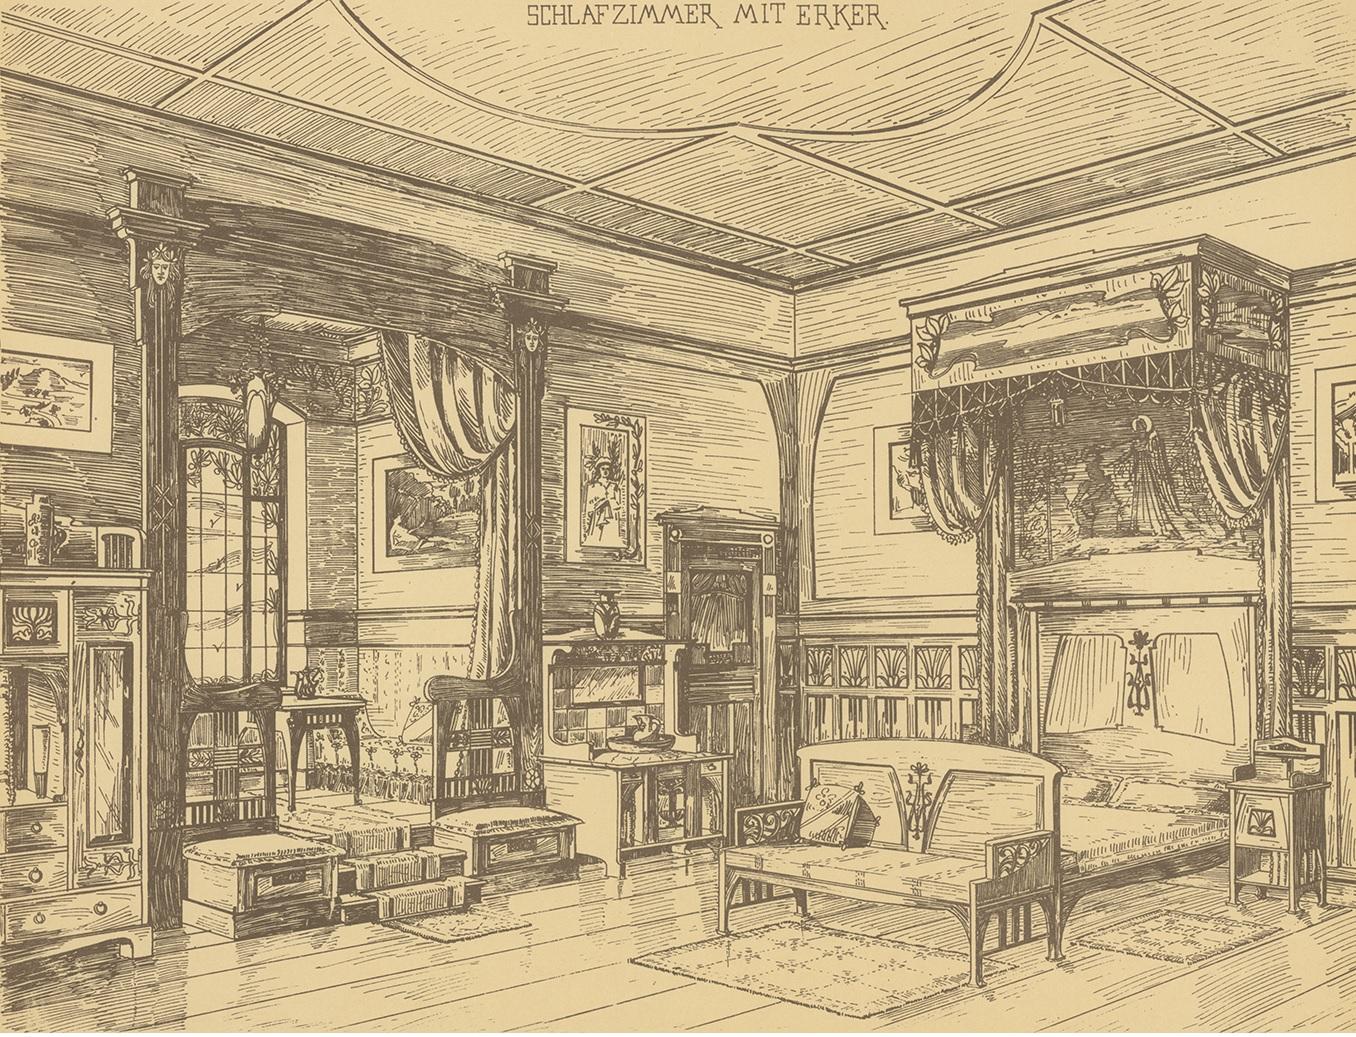 Antique print titled 'Schlafzimmer mit Erker'. Lithograph of a bedroom with bay window. This print originates from 'Det Moderna Hemmet' by Johannes Kramer. Published by Ferdinand Hey'l, circa 1910.